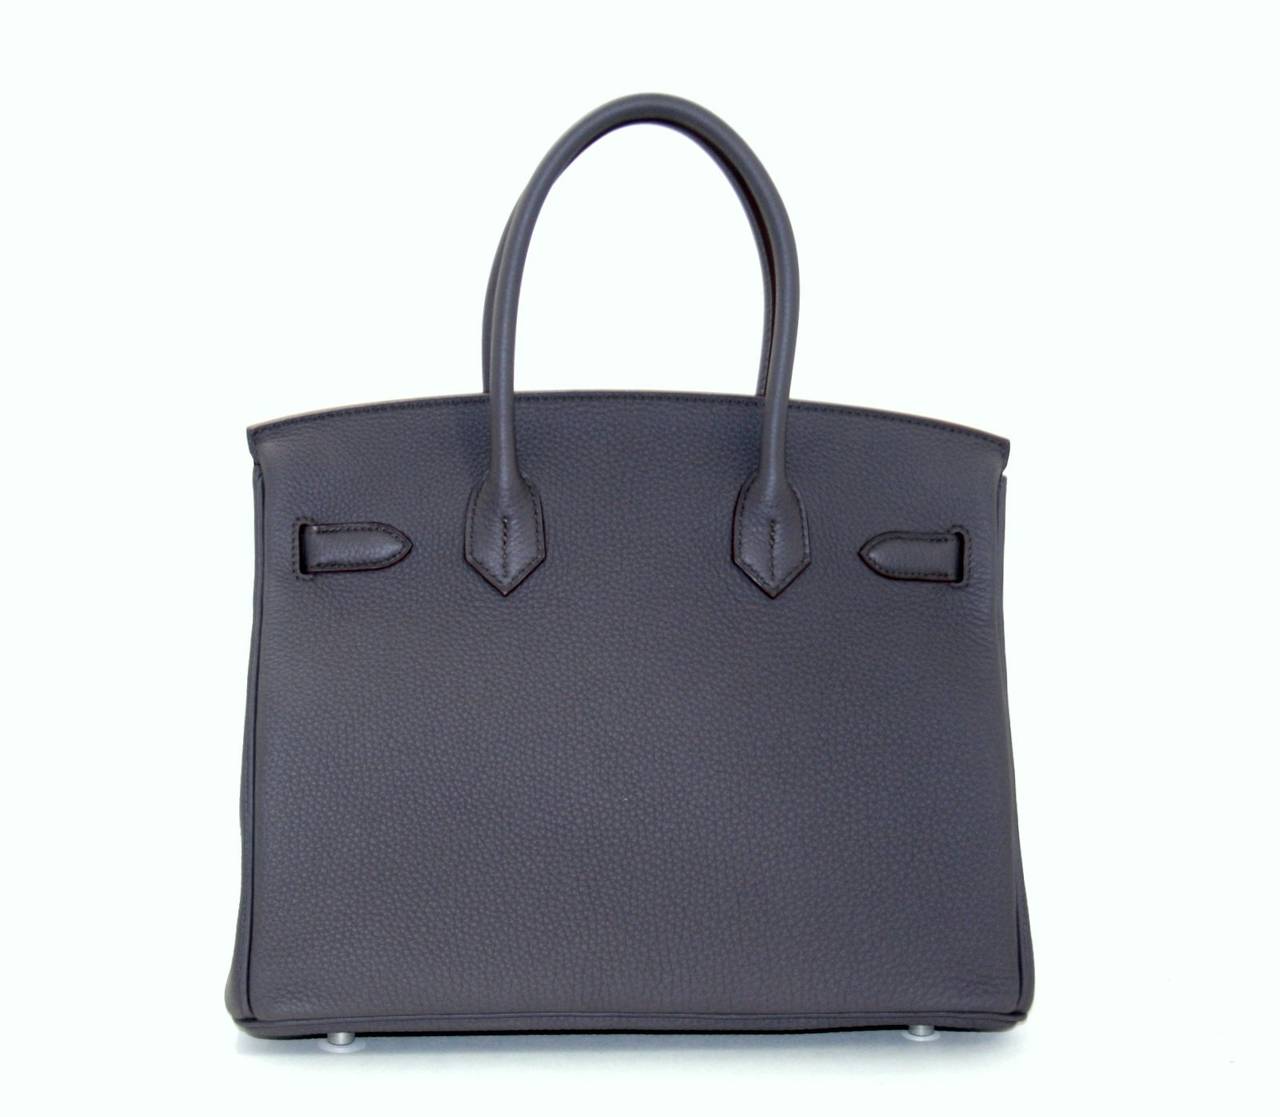 Pristine, store fresh condition (plastic on hardware) Hermès Birkin Bag in Etain Togo, 30 cm size.   Crafted by hand and considered by many as the epitome of luxury items, Birkins are extremely difficult to get. Scratch resistant and richly